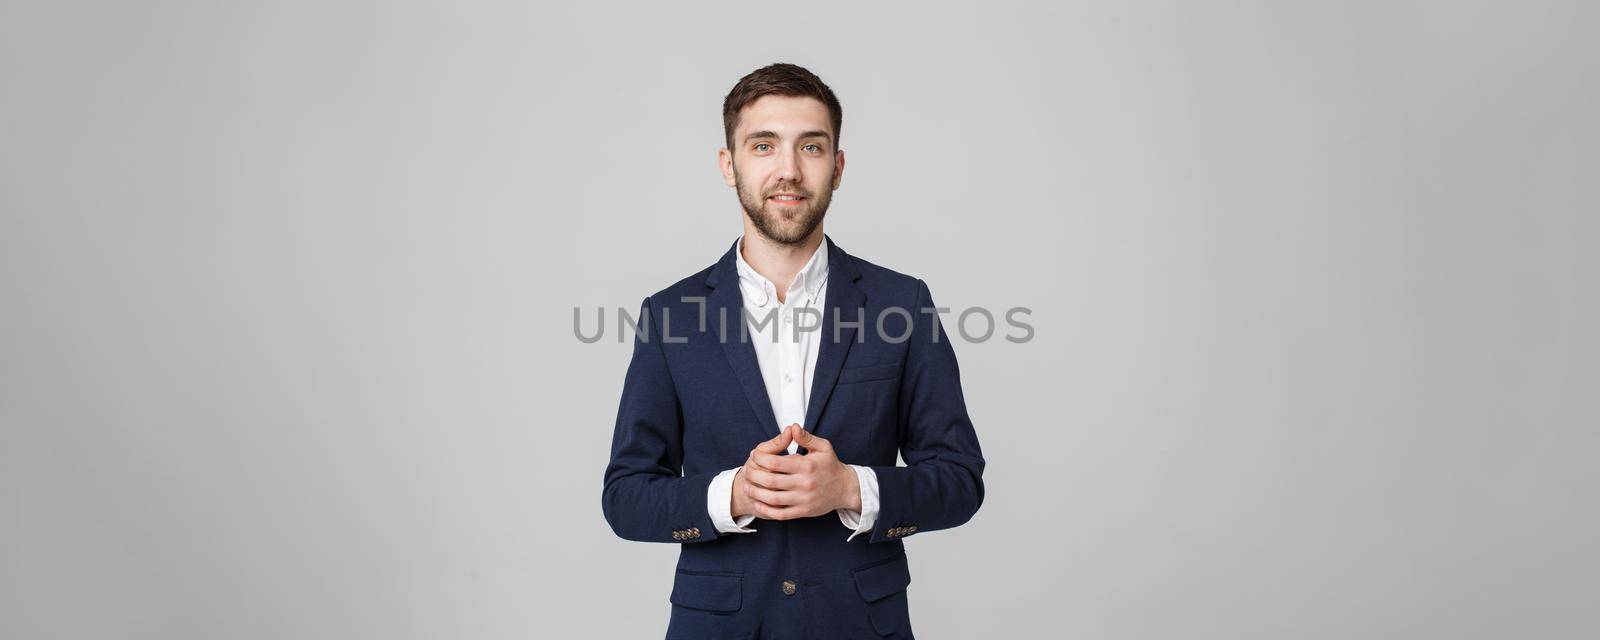 Business Concept - Portrait Handsome Business man holding hands with confident face. White Background.